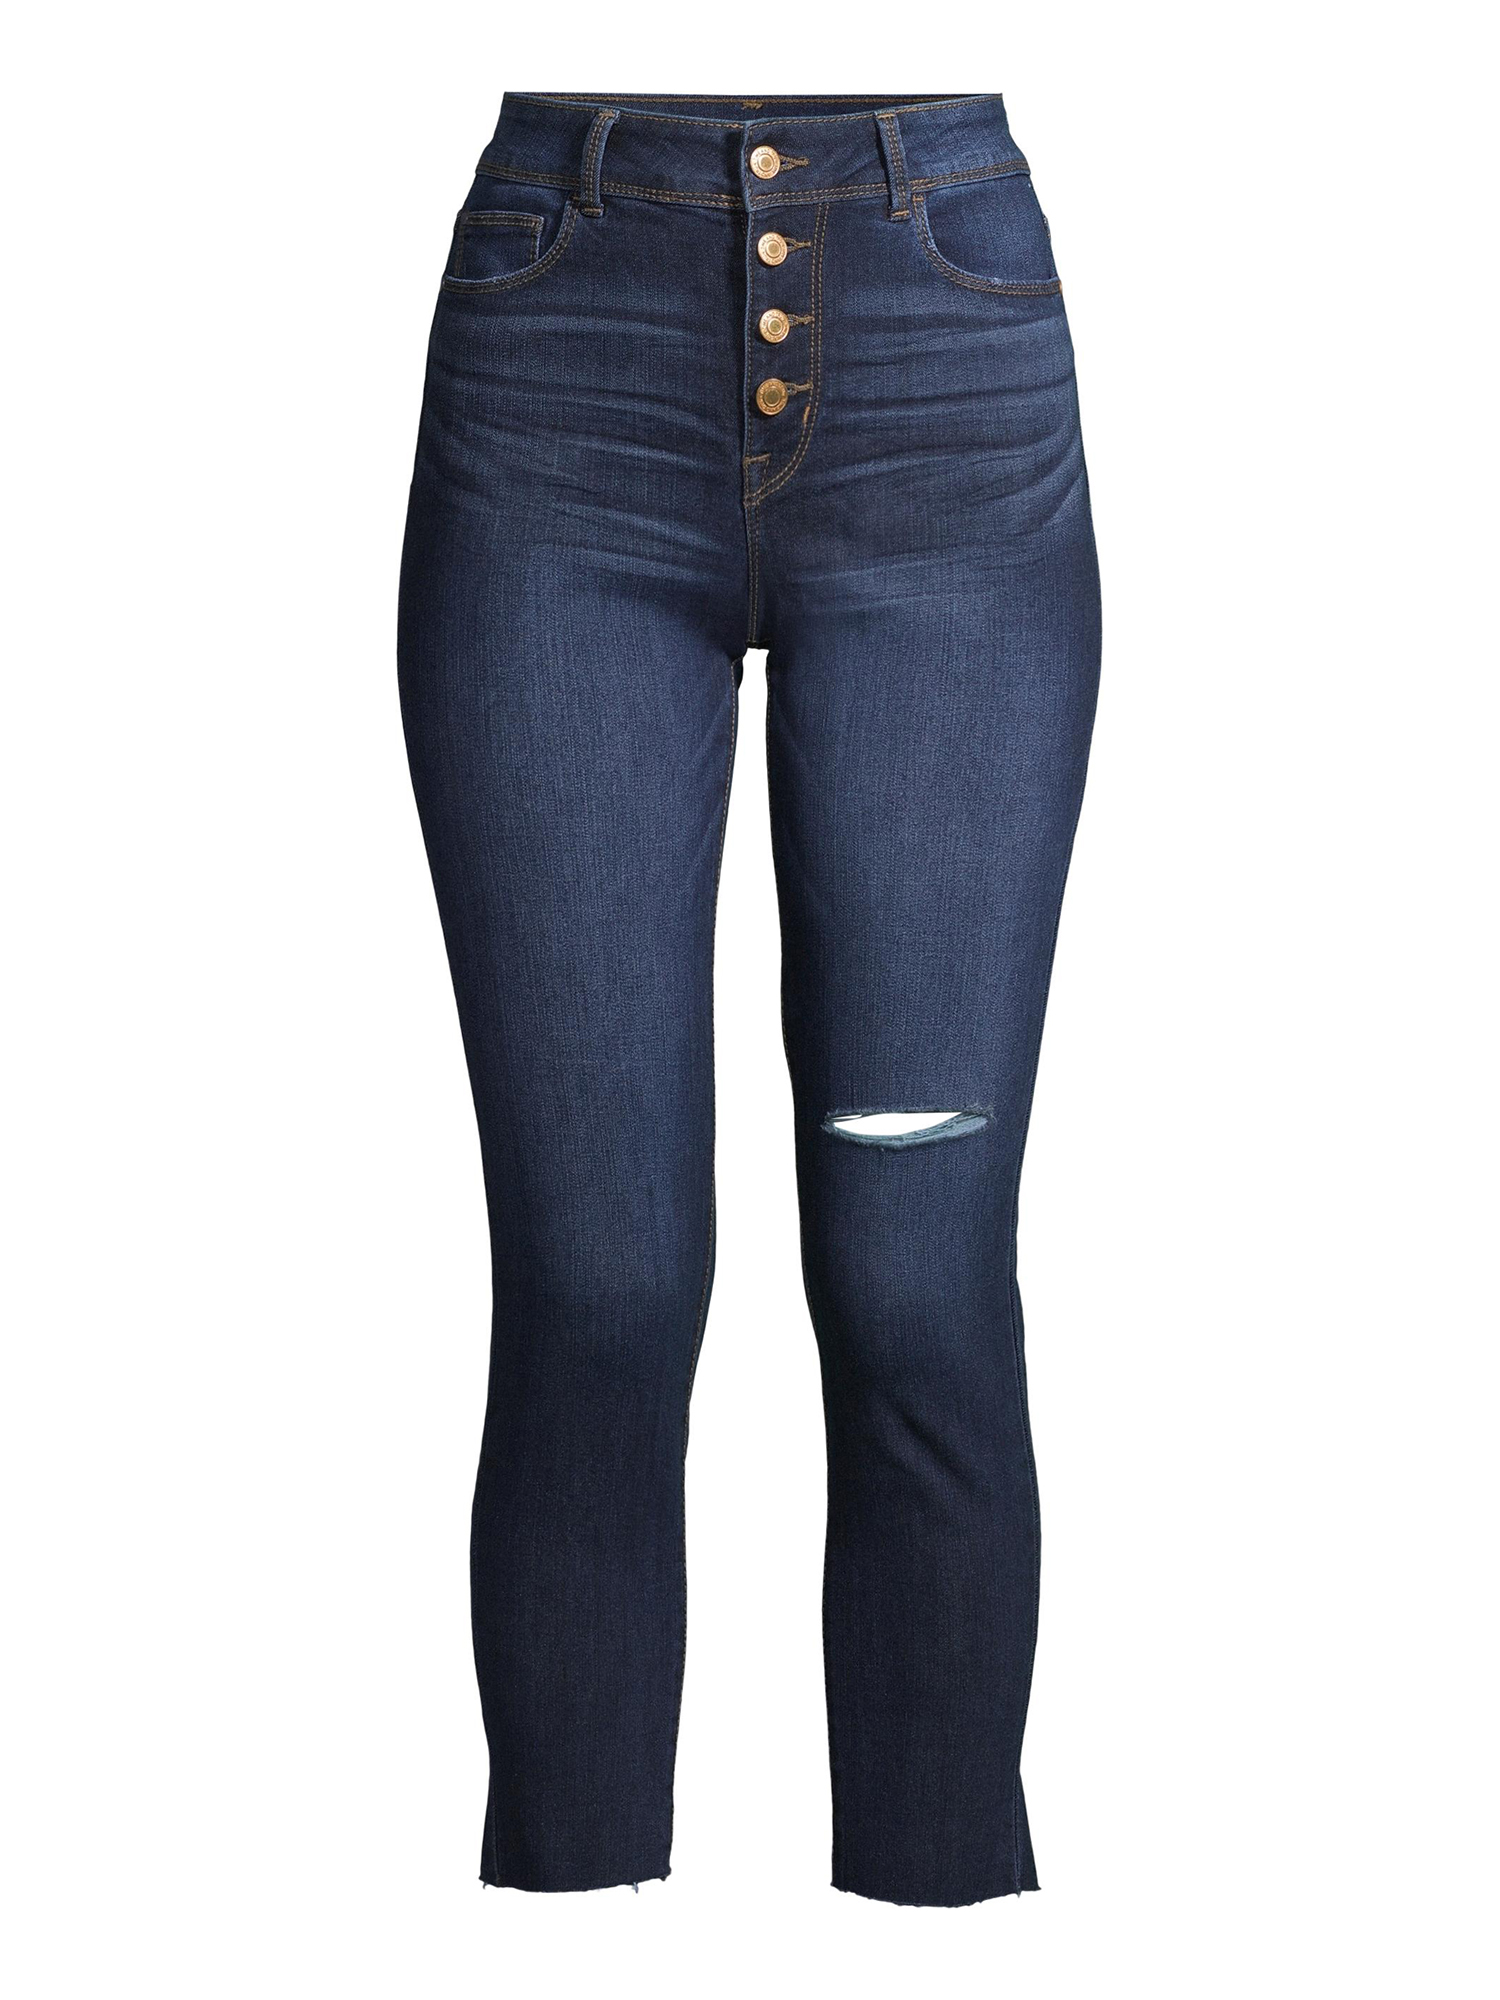 Time and Tru Women's High Rise Button Skinny Jeans - image 3 of 6